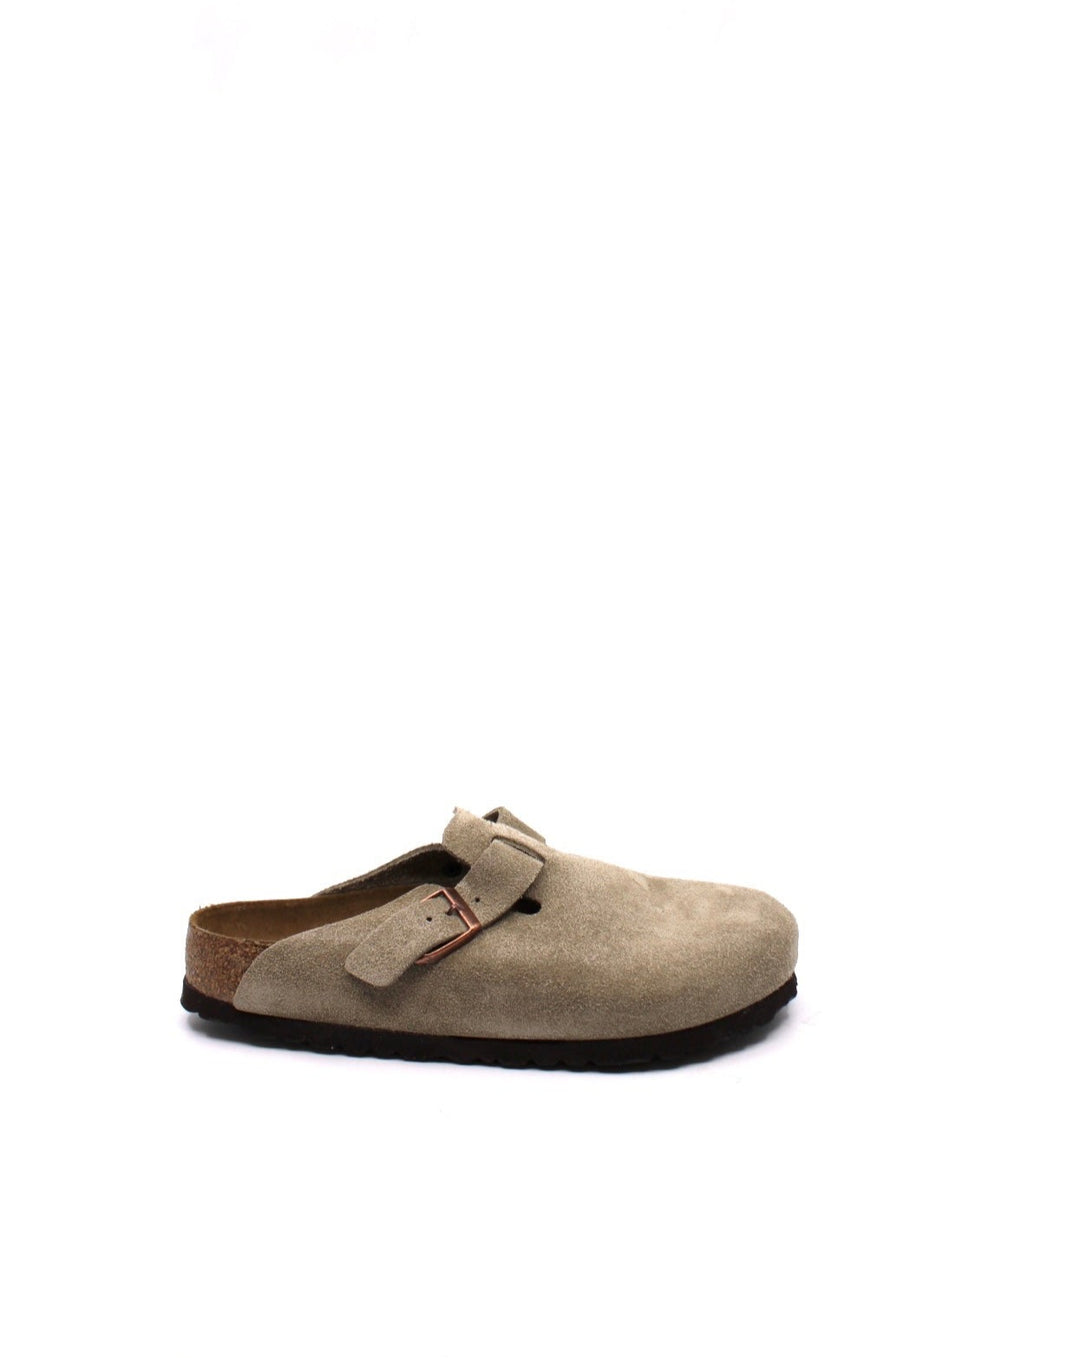 Birkenstock Boston Taupe Suede Soft Footbed Narrow - Dear Lucy